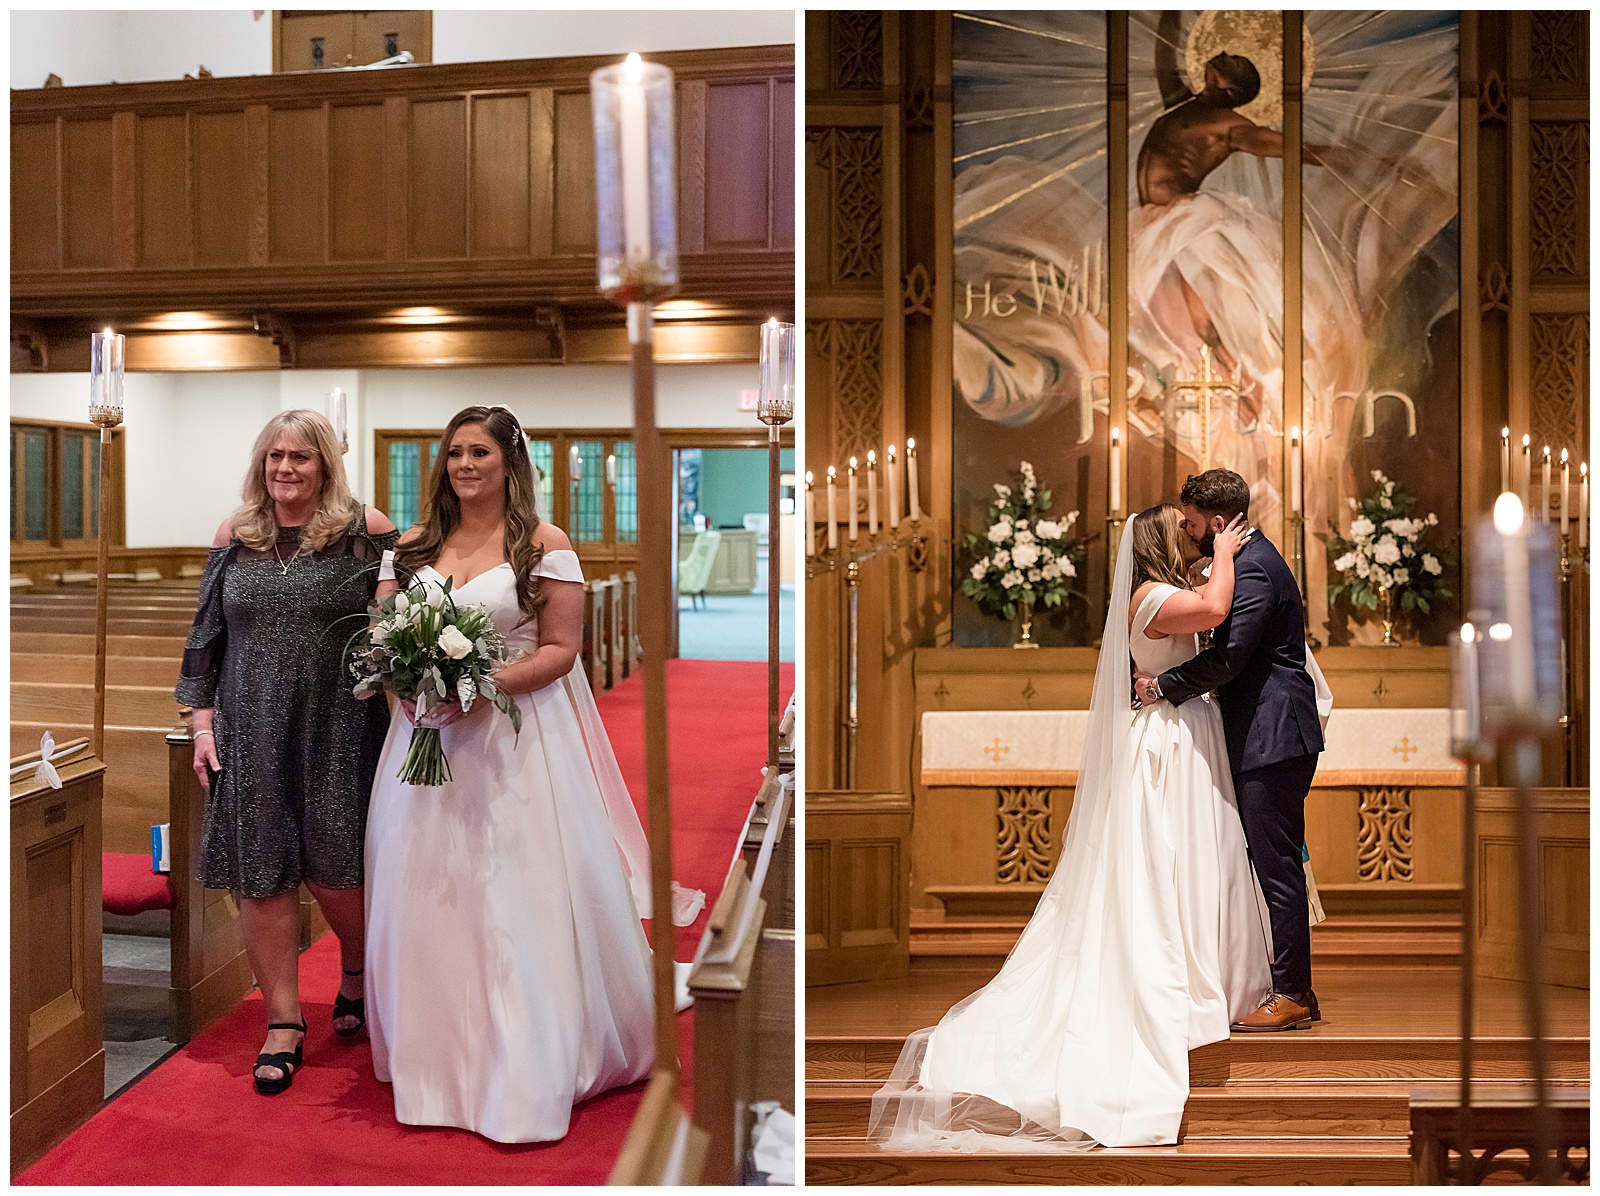 bride's mother walking her down the aisle at intimate wedding in catholic church